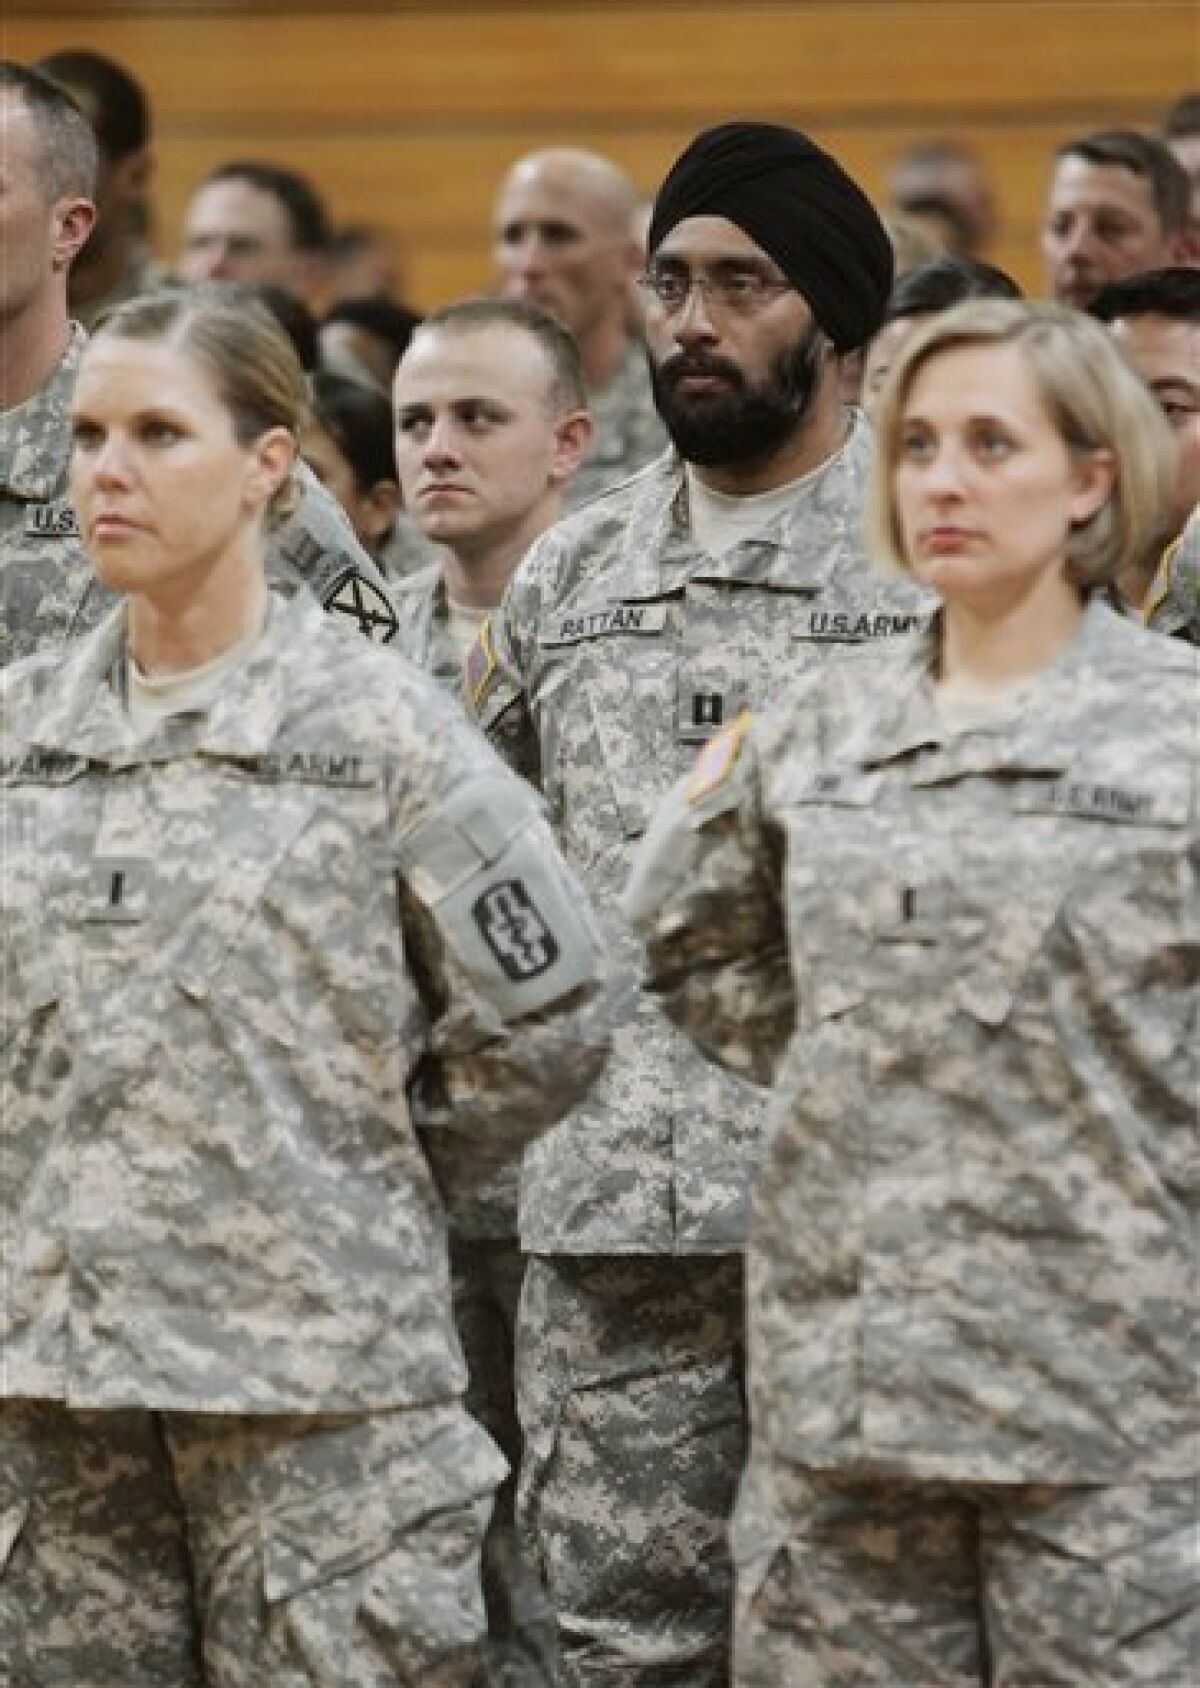 U.S. Army Capt. Tejdeep Singh Rattan, center wearing turban, stands with other graduates during a U.S. Army officer basic training graduation ceremony at Fort Sam Houston in San Antonio on Monday, March 22, 2010. Capt. Rattan is the first Sikh allowed to complete officer basic training while wearing the traditional turban and full beard since the Army altered the dress code, which had made exceptions for Sikh soldiers, in 1984. (AP Photo/Darren Abate)